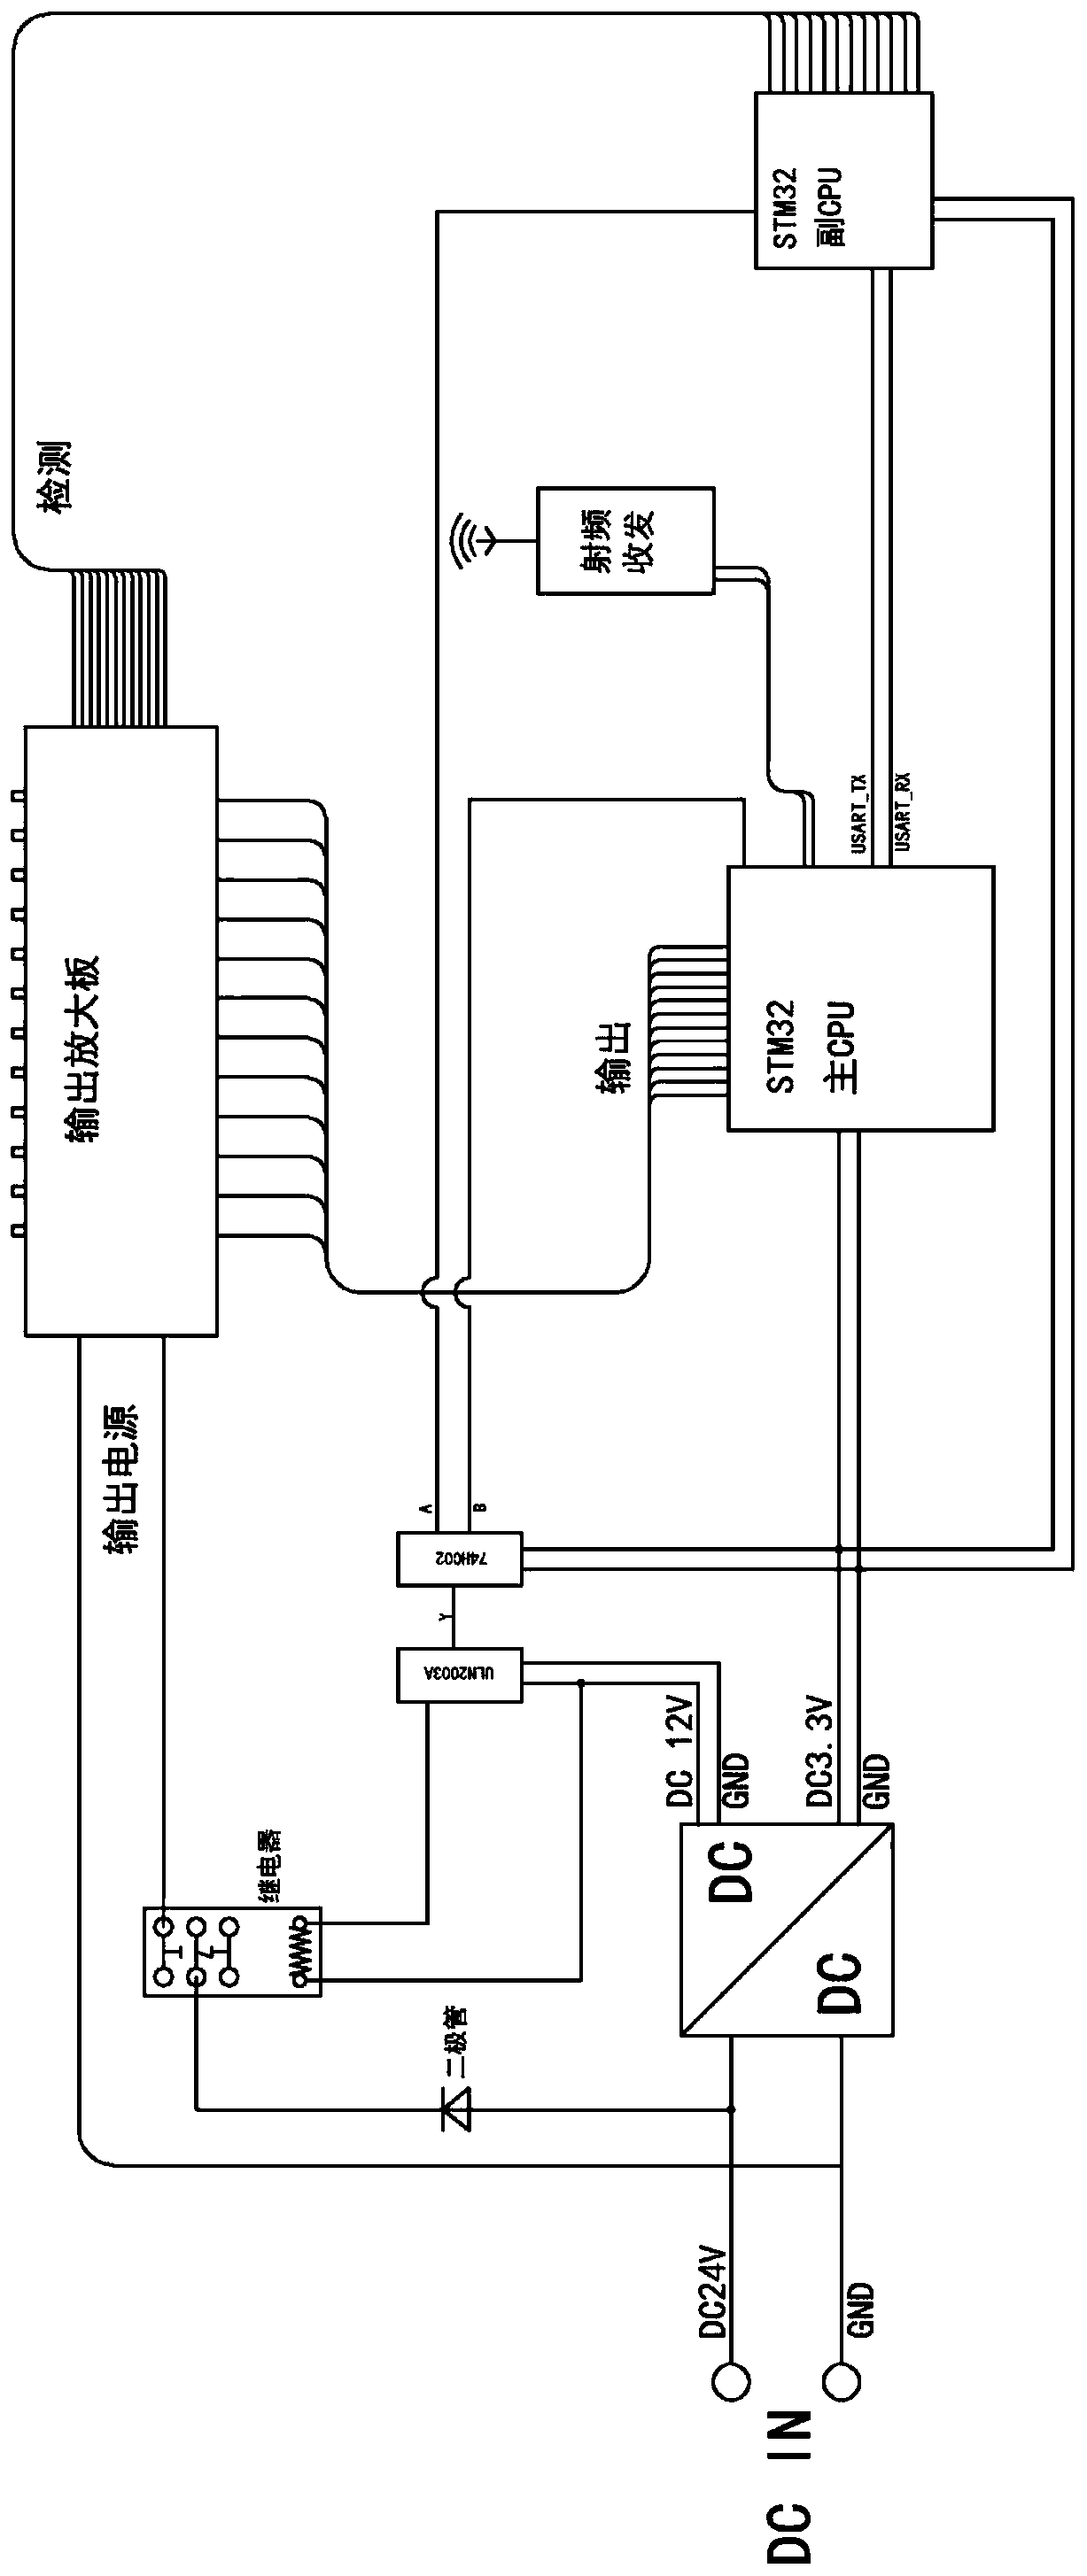 Double MCU Closed-loop Control Method for Industrial Remote Control Receiver